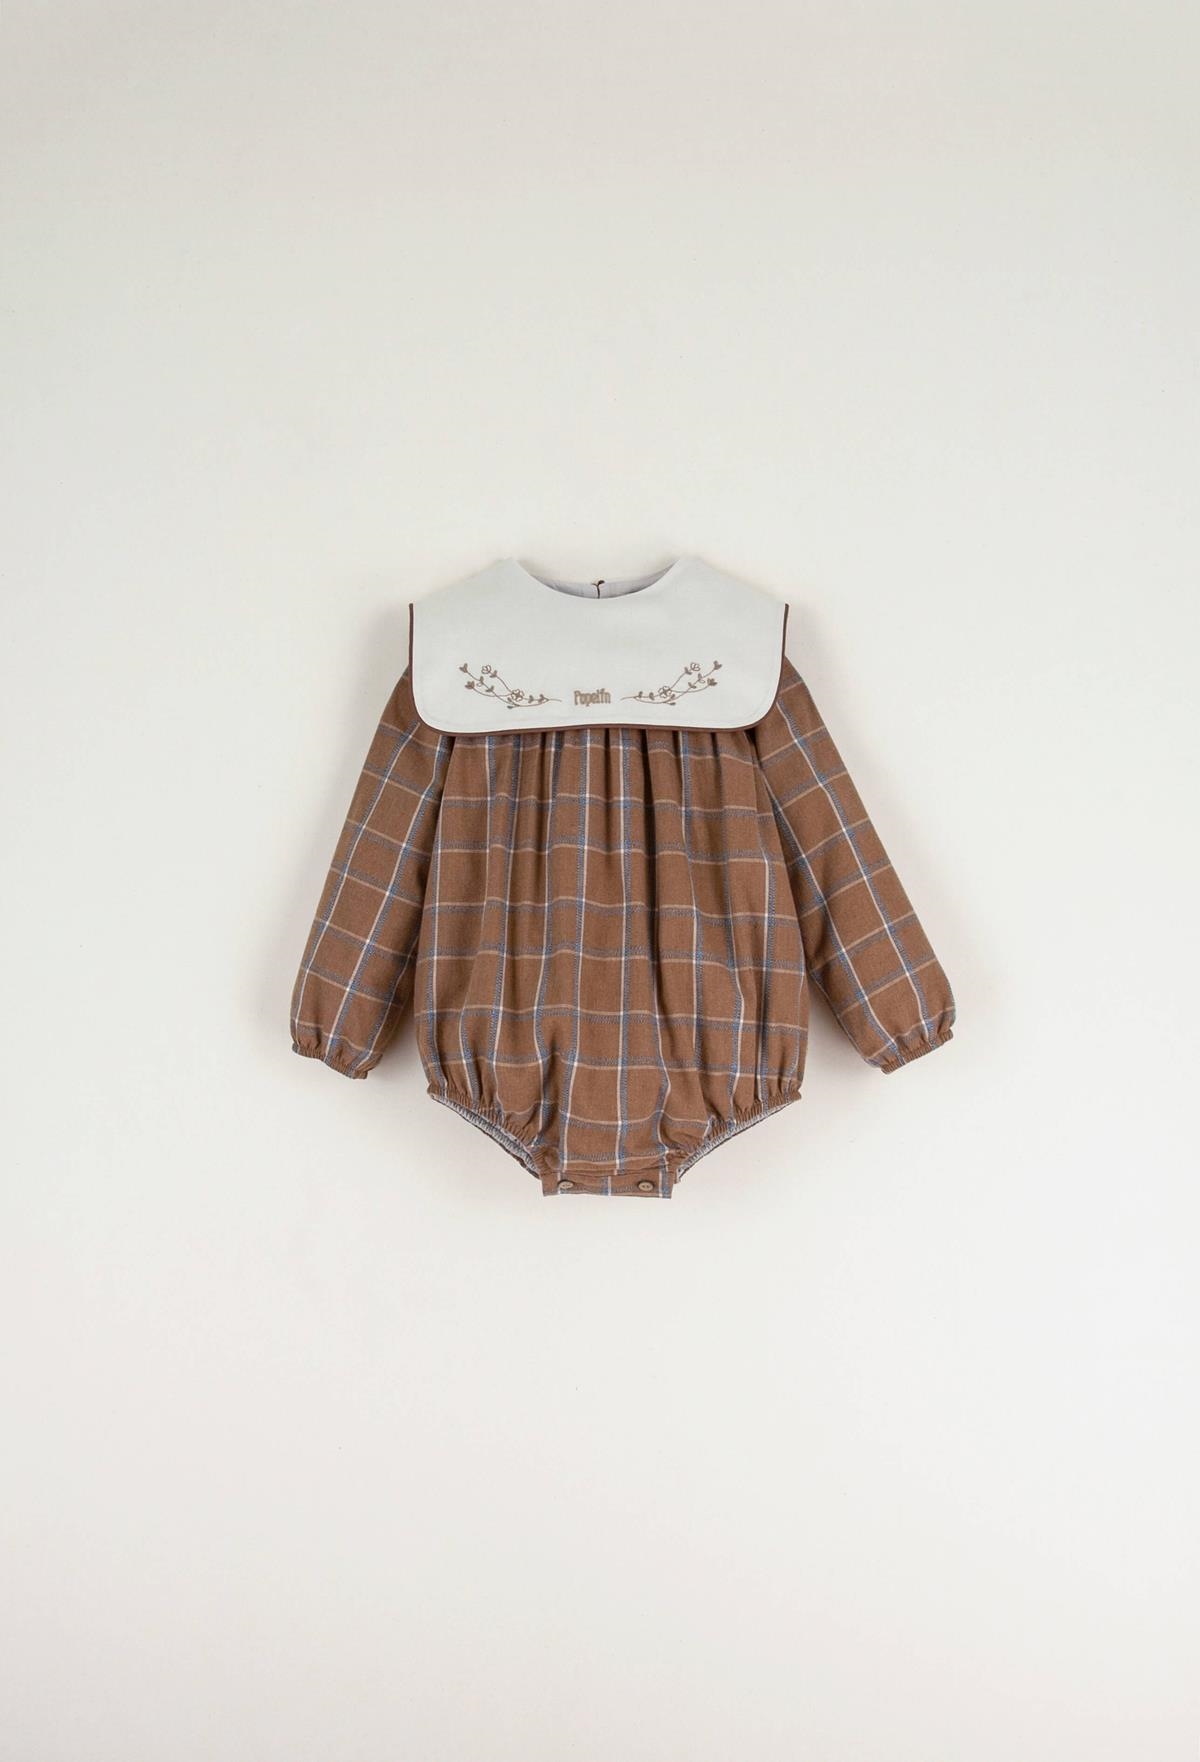 Mod.2.3 Terracotta plaid embroidered romper suit with yoke | AW22.23 Mod.2.3 Terracotta plaid embroidered romper suit with yoke